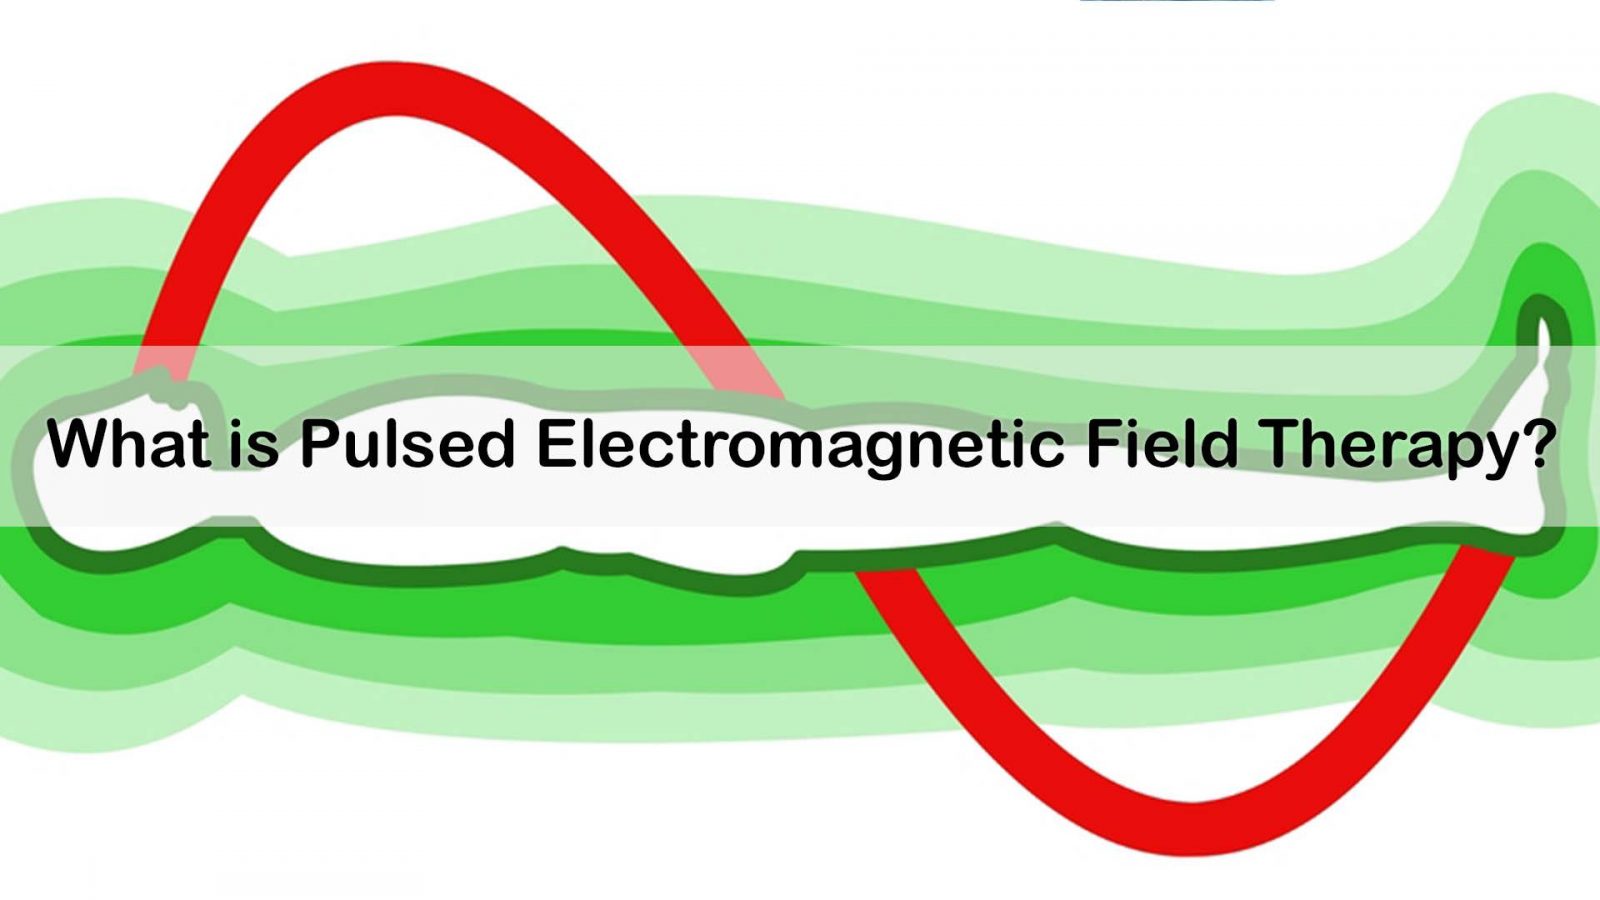 What is pulsed electromagnetic field therapy?